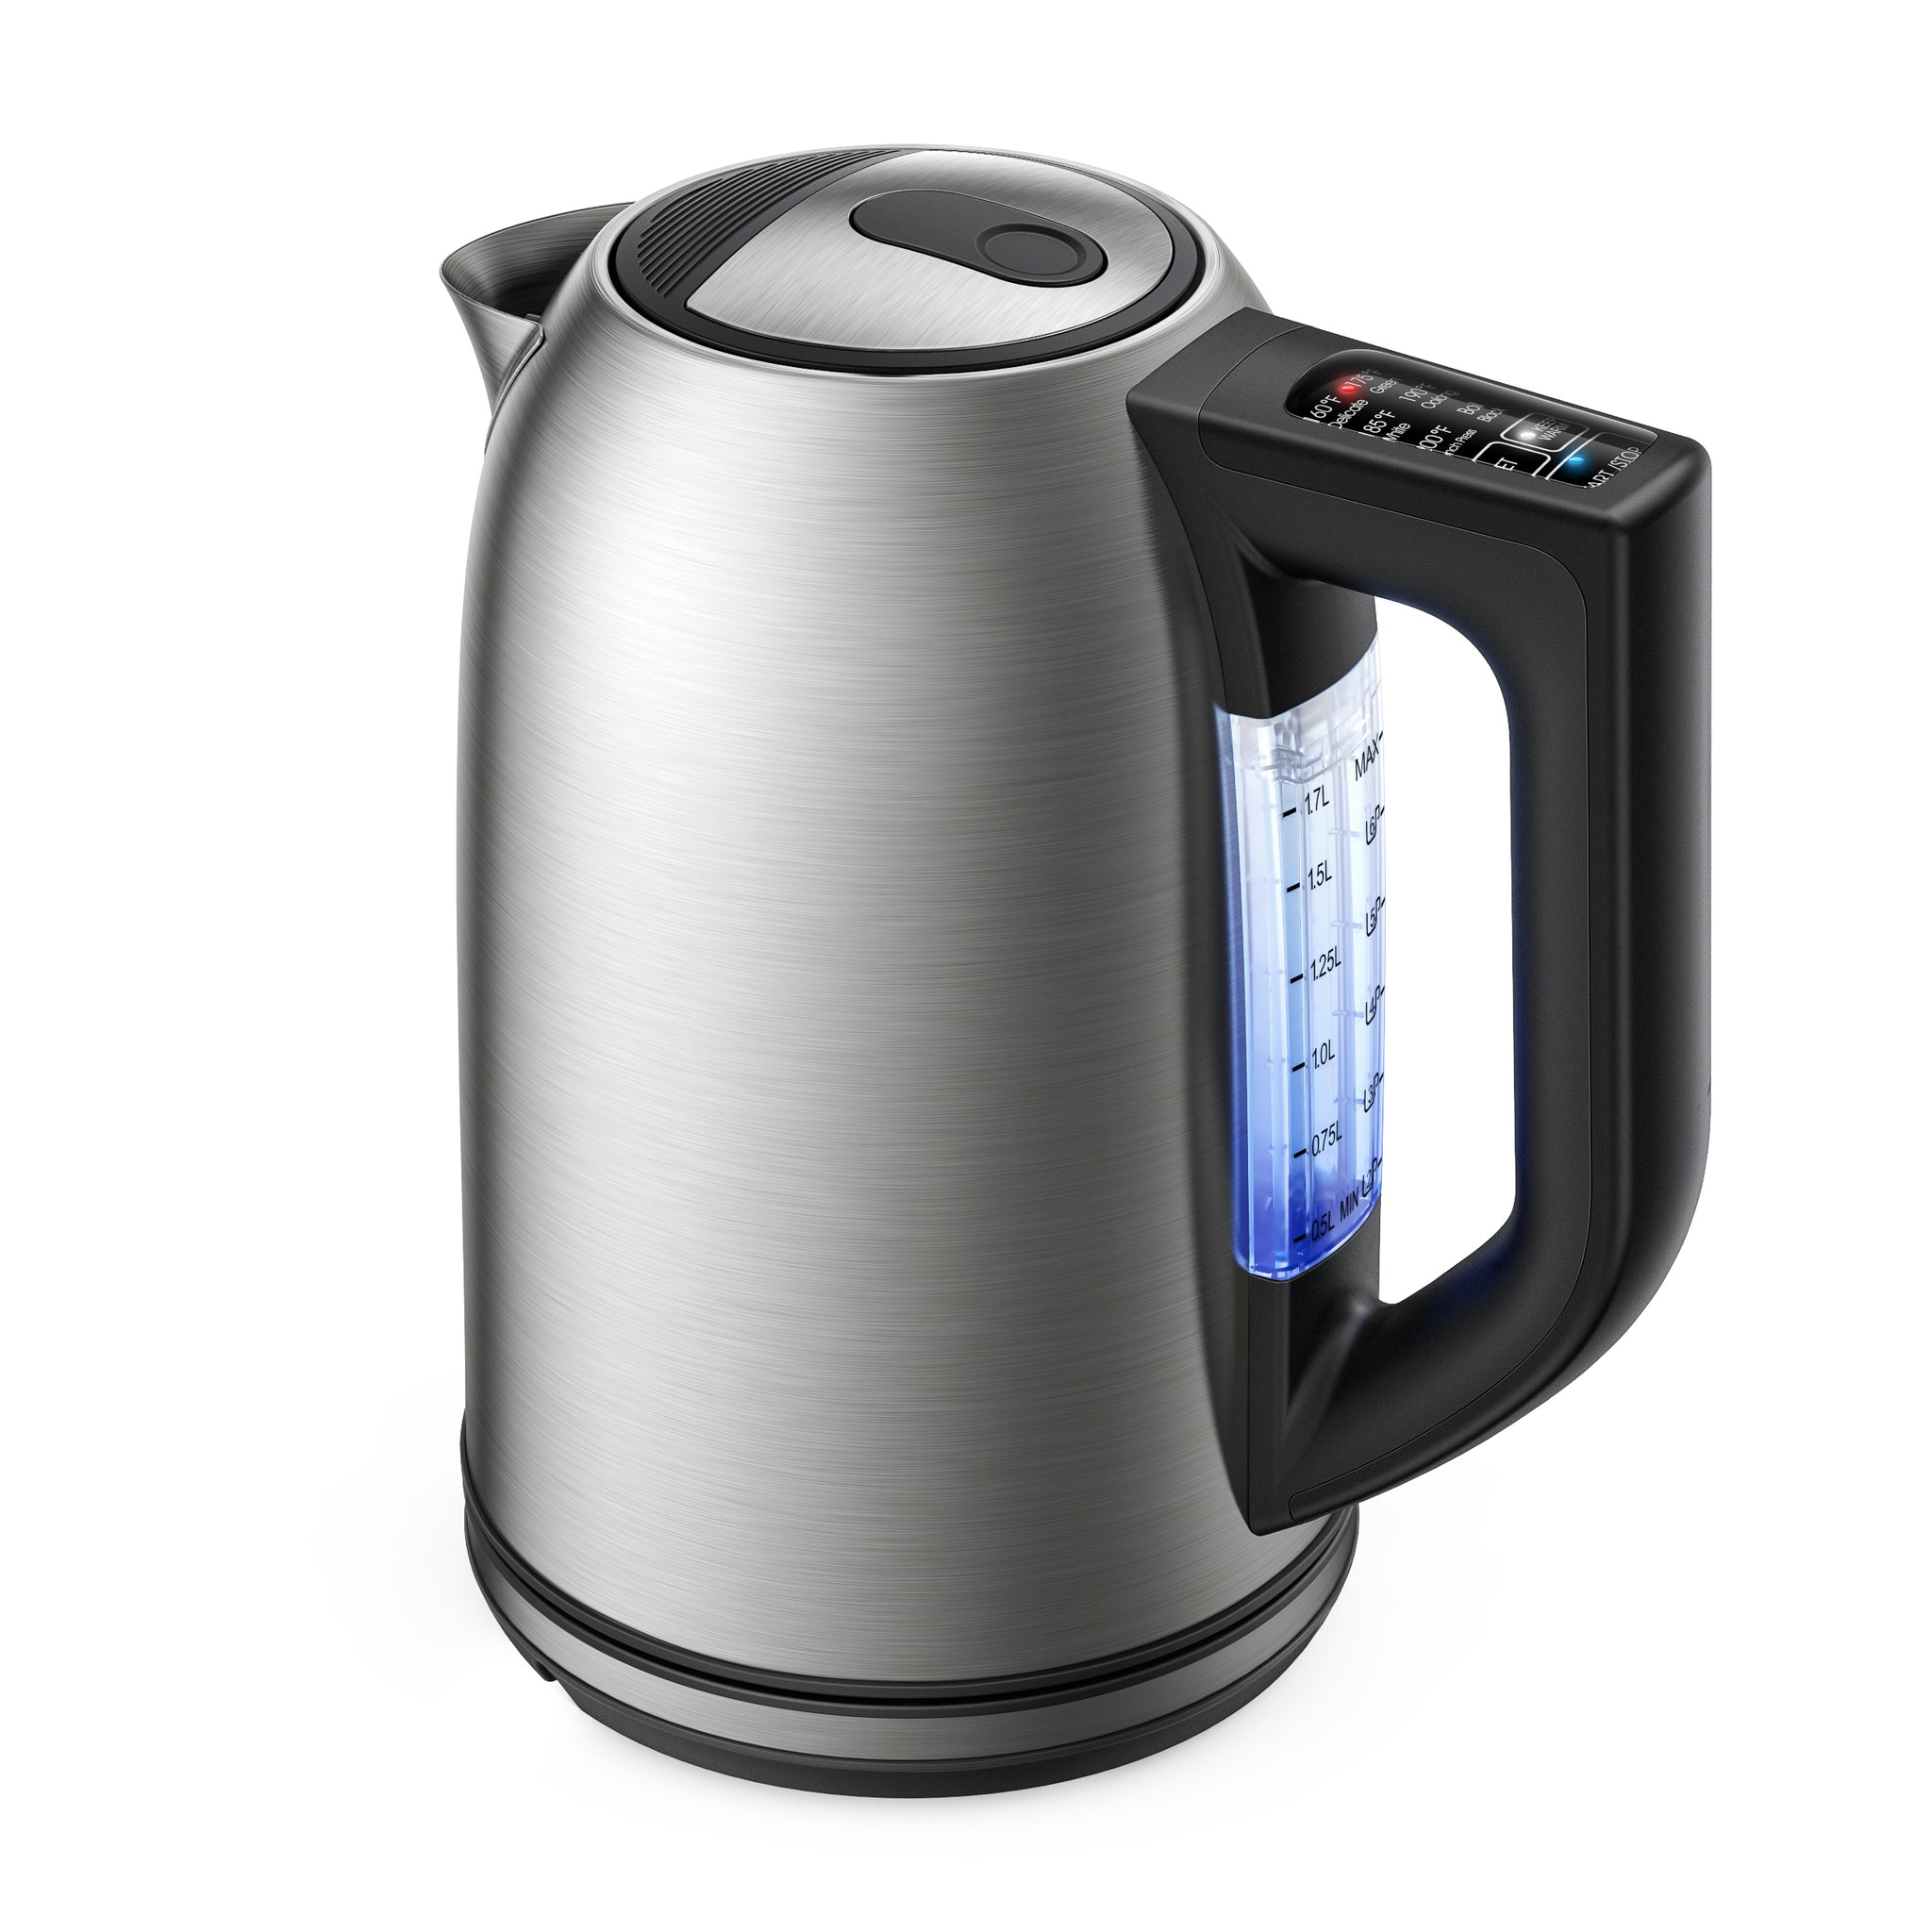 Stainless Steel electric tea kettle high power electric water